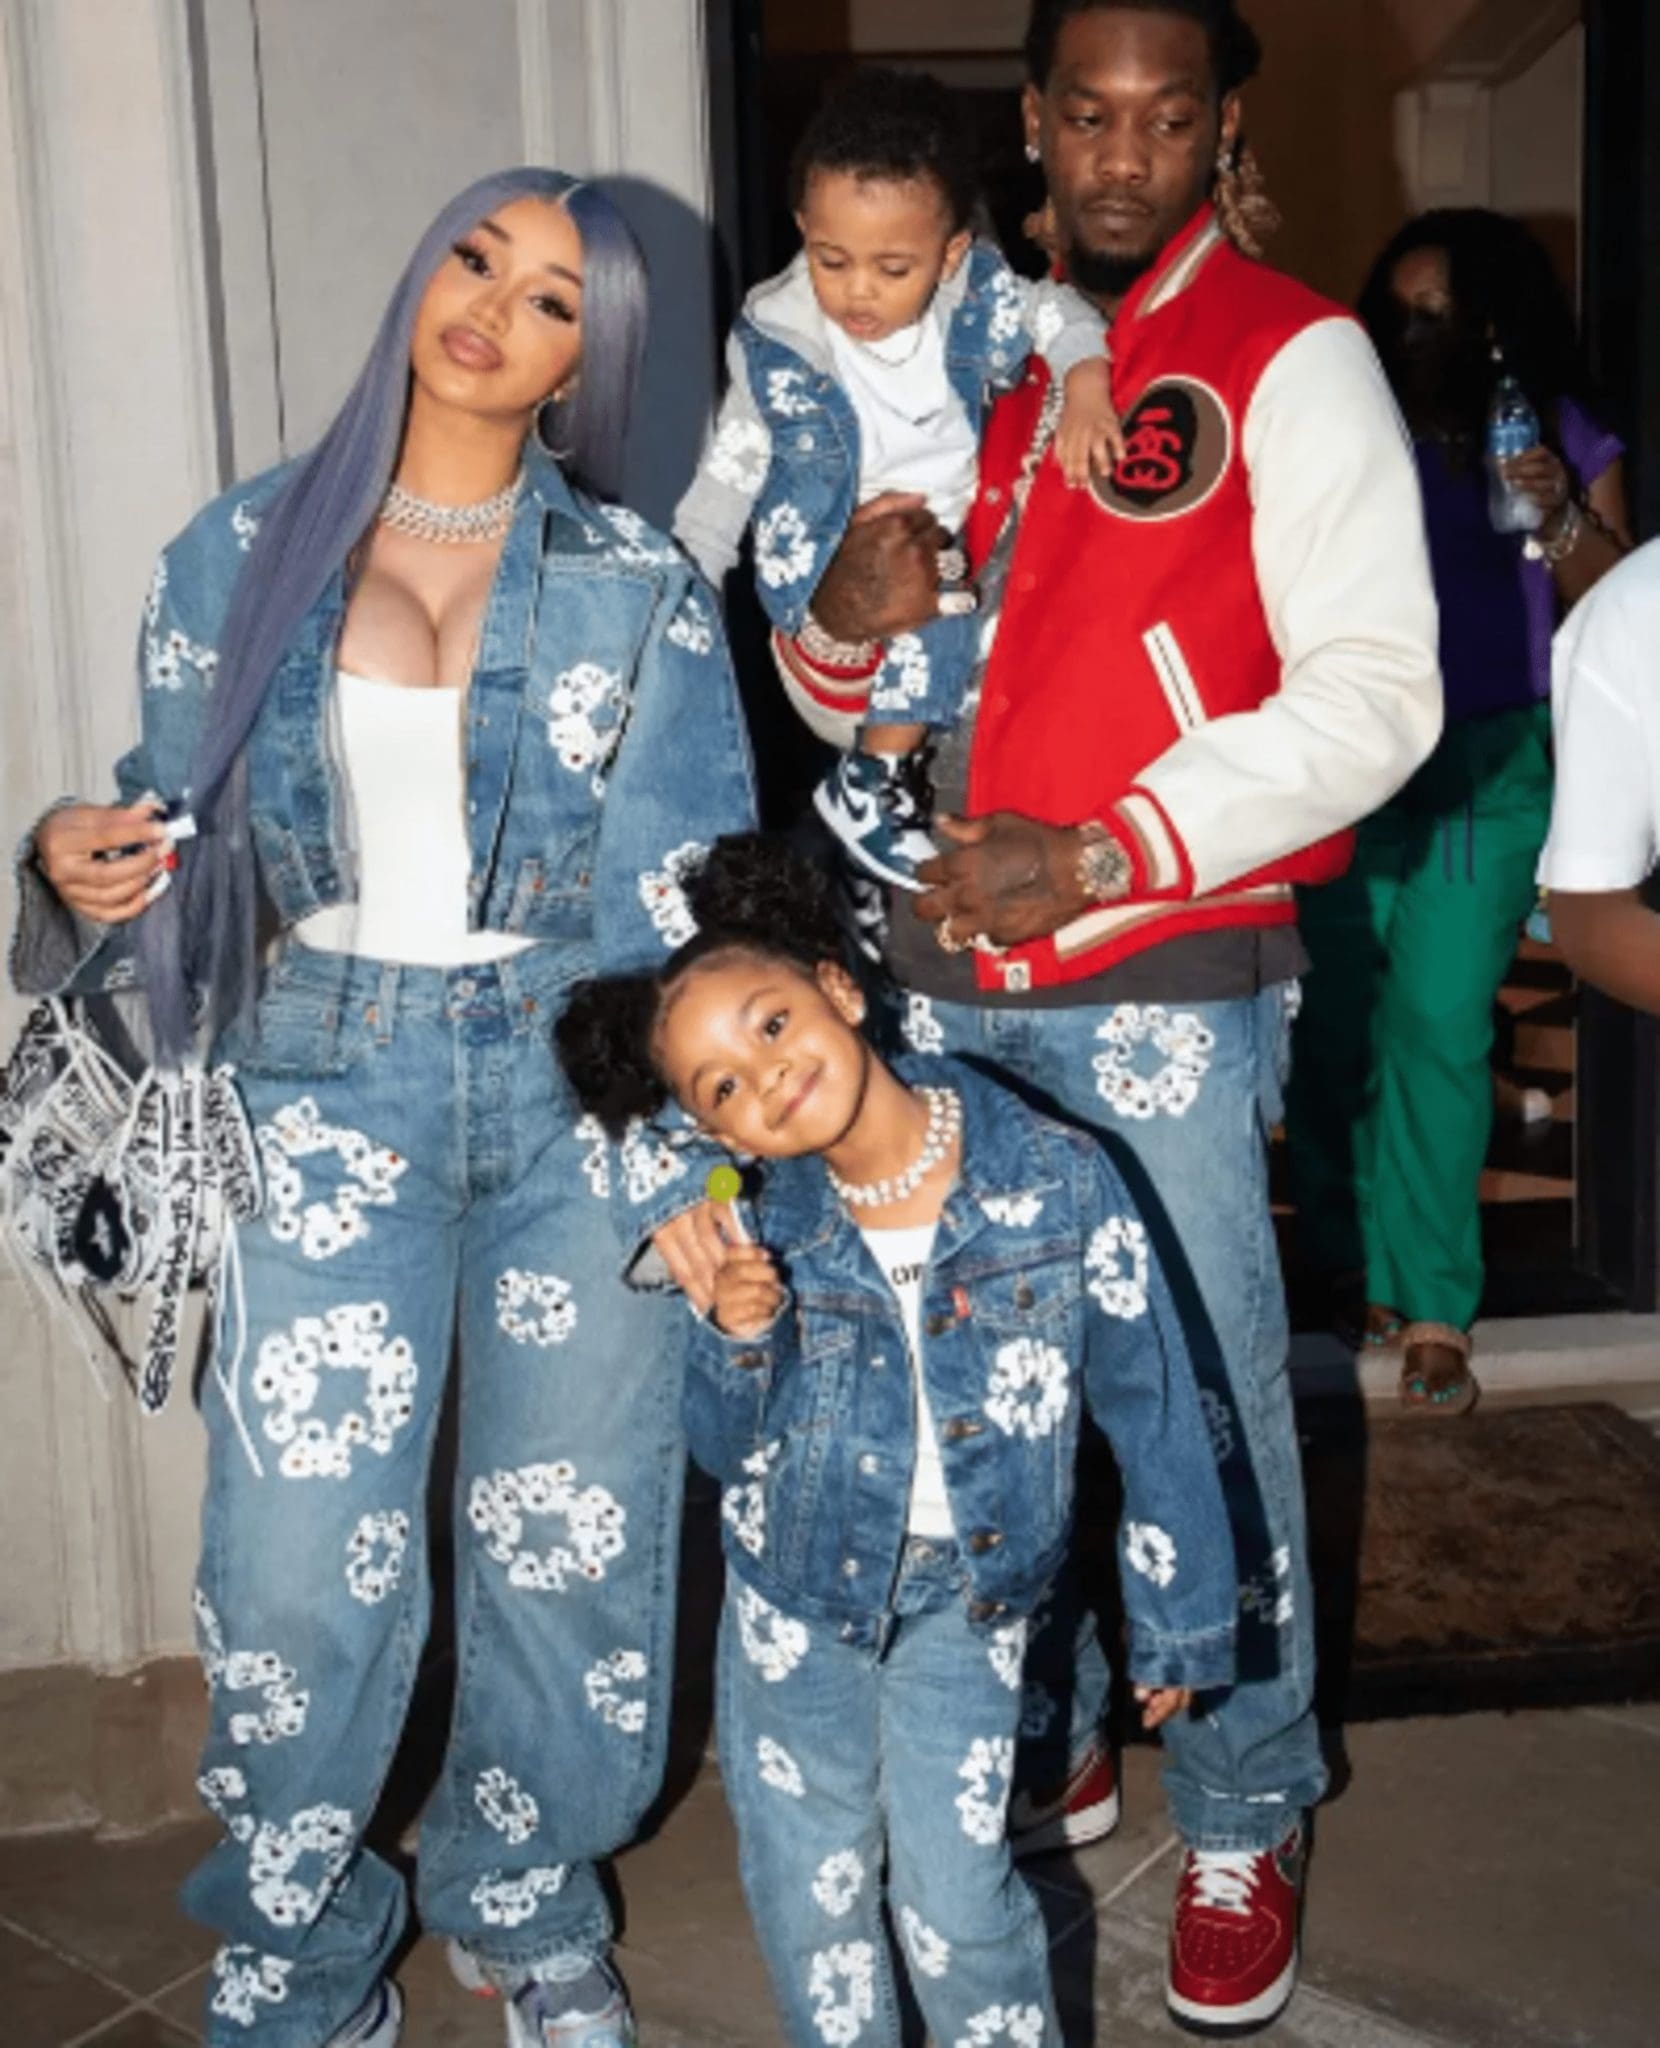 This weekend, Cardi B was hit with cheating suspicions, and in response, she posted some NSFW text exchanges from her and her husband, Offset.